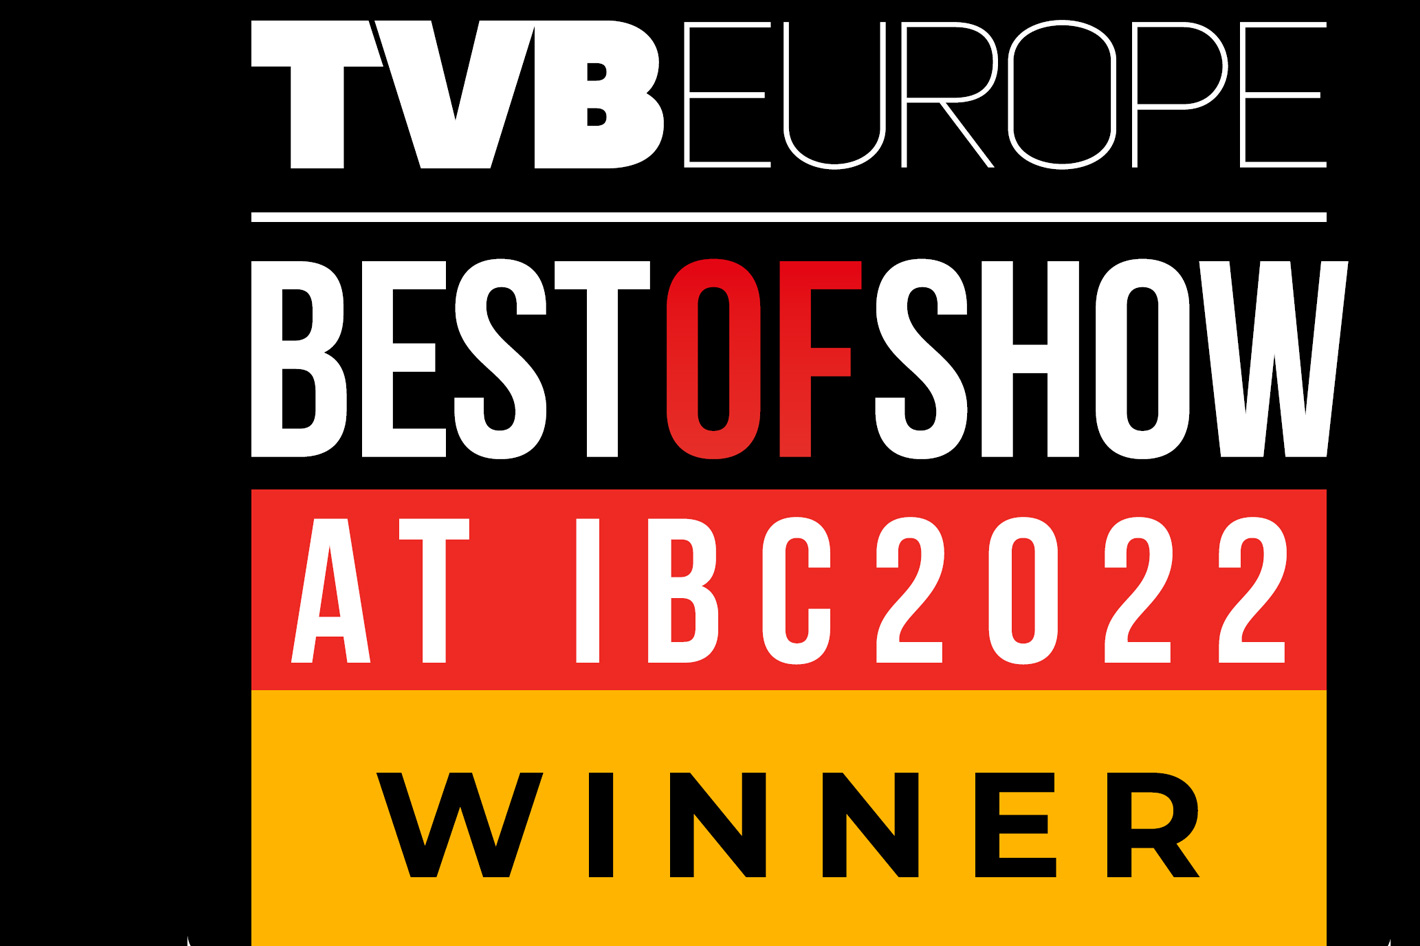 Ateliere Connect wins Best of Show at IBC2022